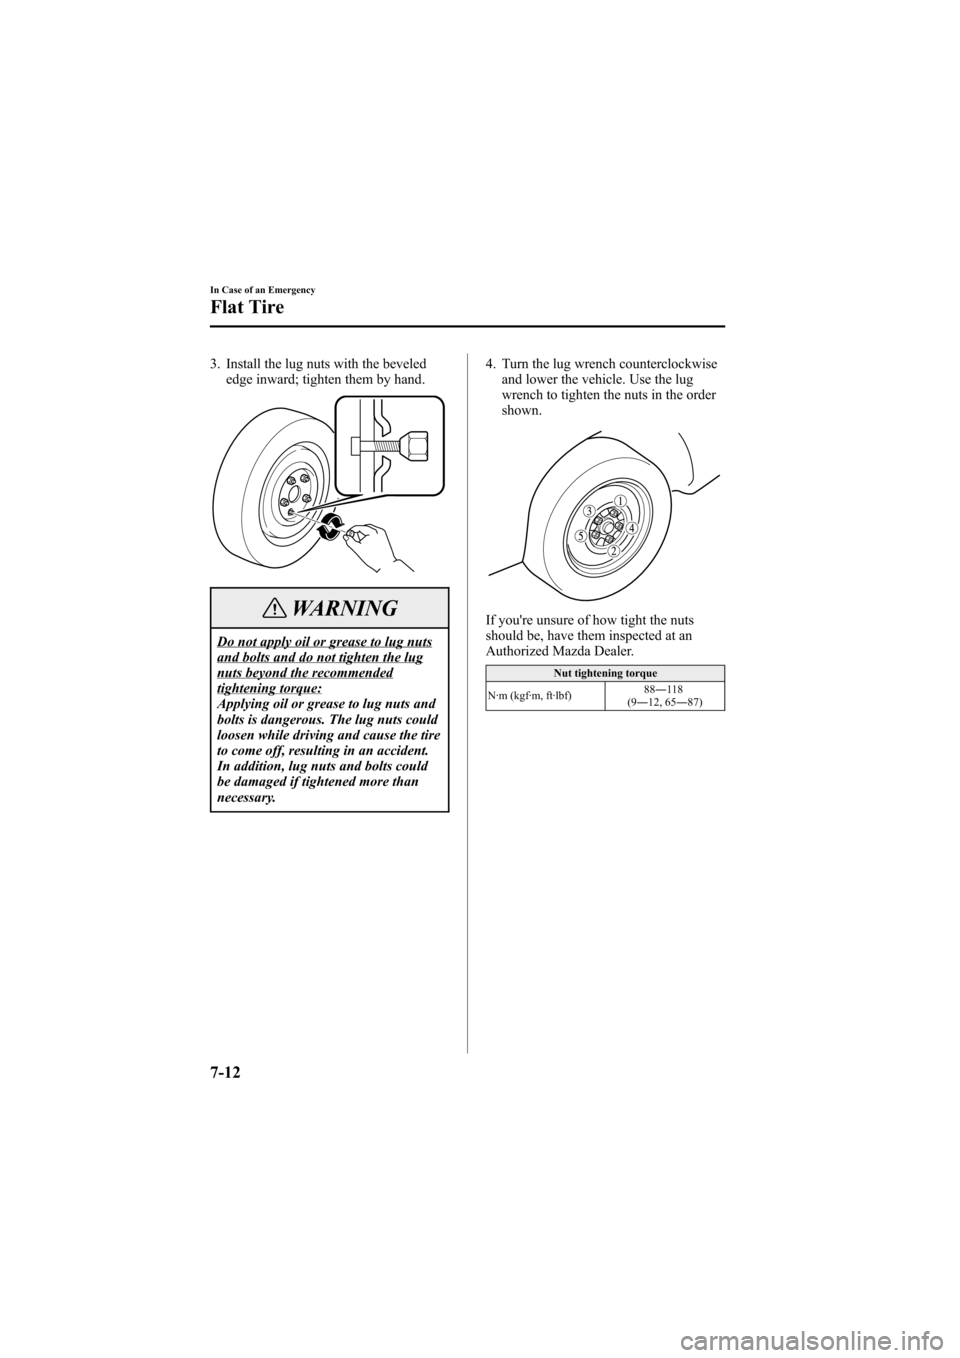 MAZDA MODEL 6 2007  Owners Manual (in English) Black plate (254,1)
3. Install the lug nuts with the beveled
edge inward; tighten them by hand.
WARNING
Do not apply oil or grease to lug nutsand bolts and do not tighten the lugnuts beyond the recomm